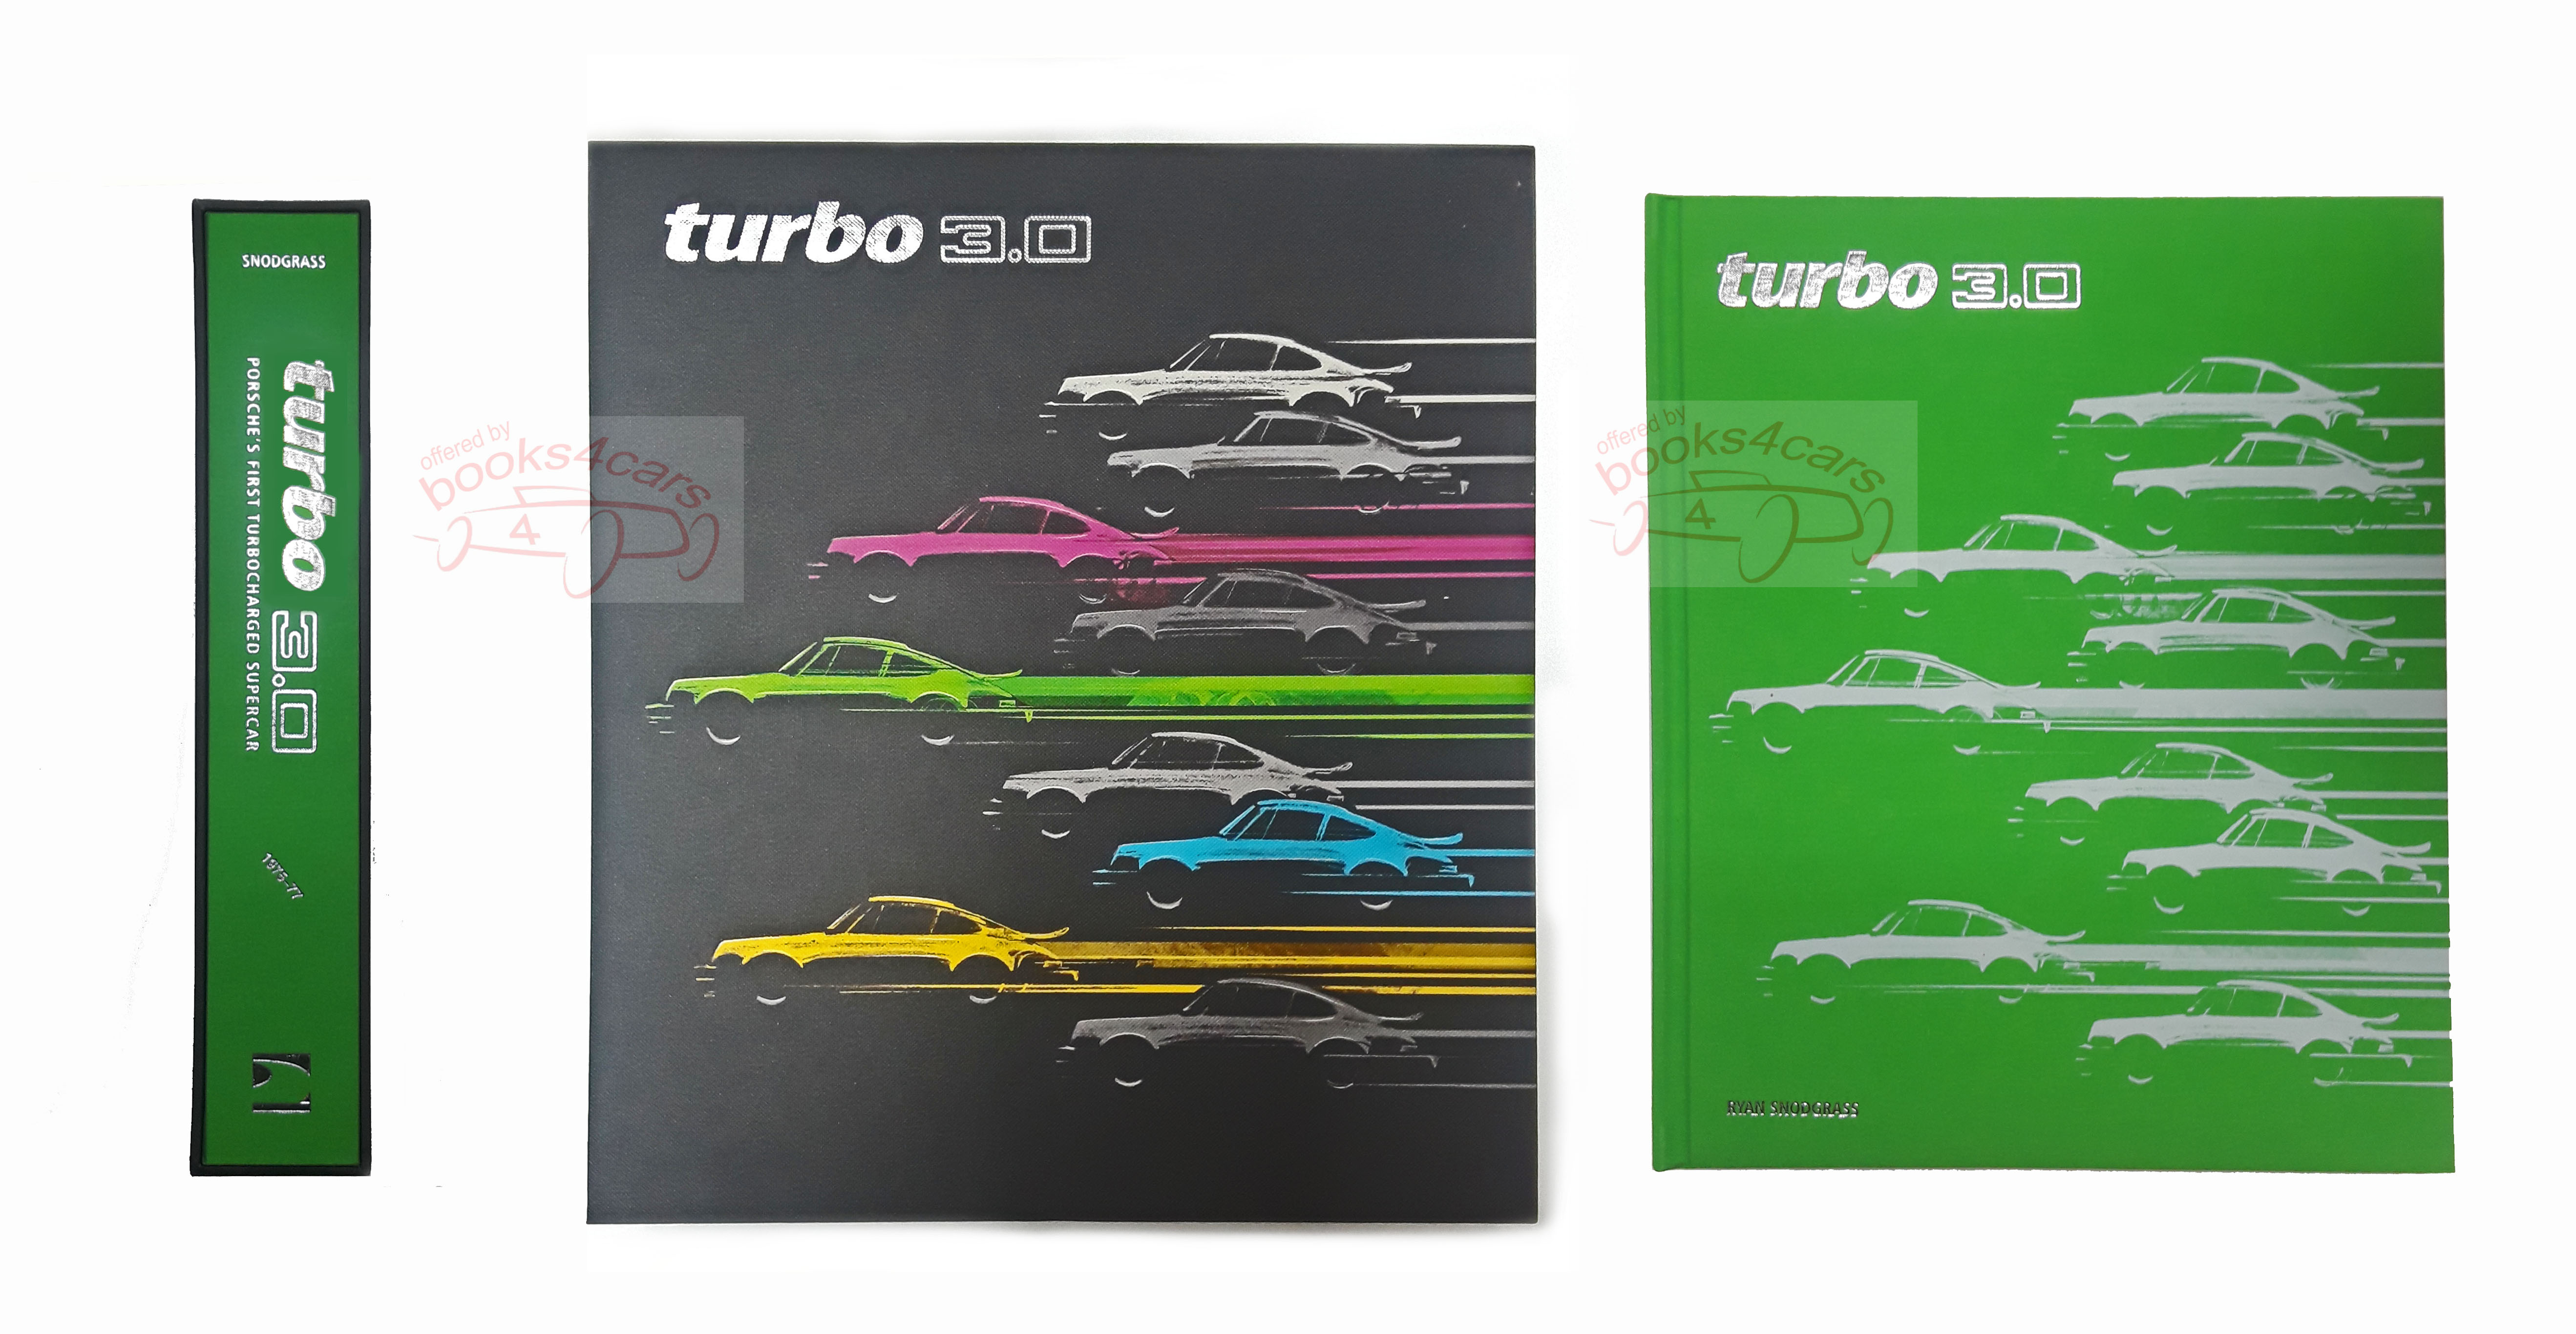 75-77 Porsche 911 Turbo 3.0 history by R. Snodgrass 536 pages w/1,500+ photos in slipcase 5+kg